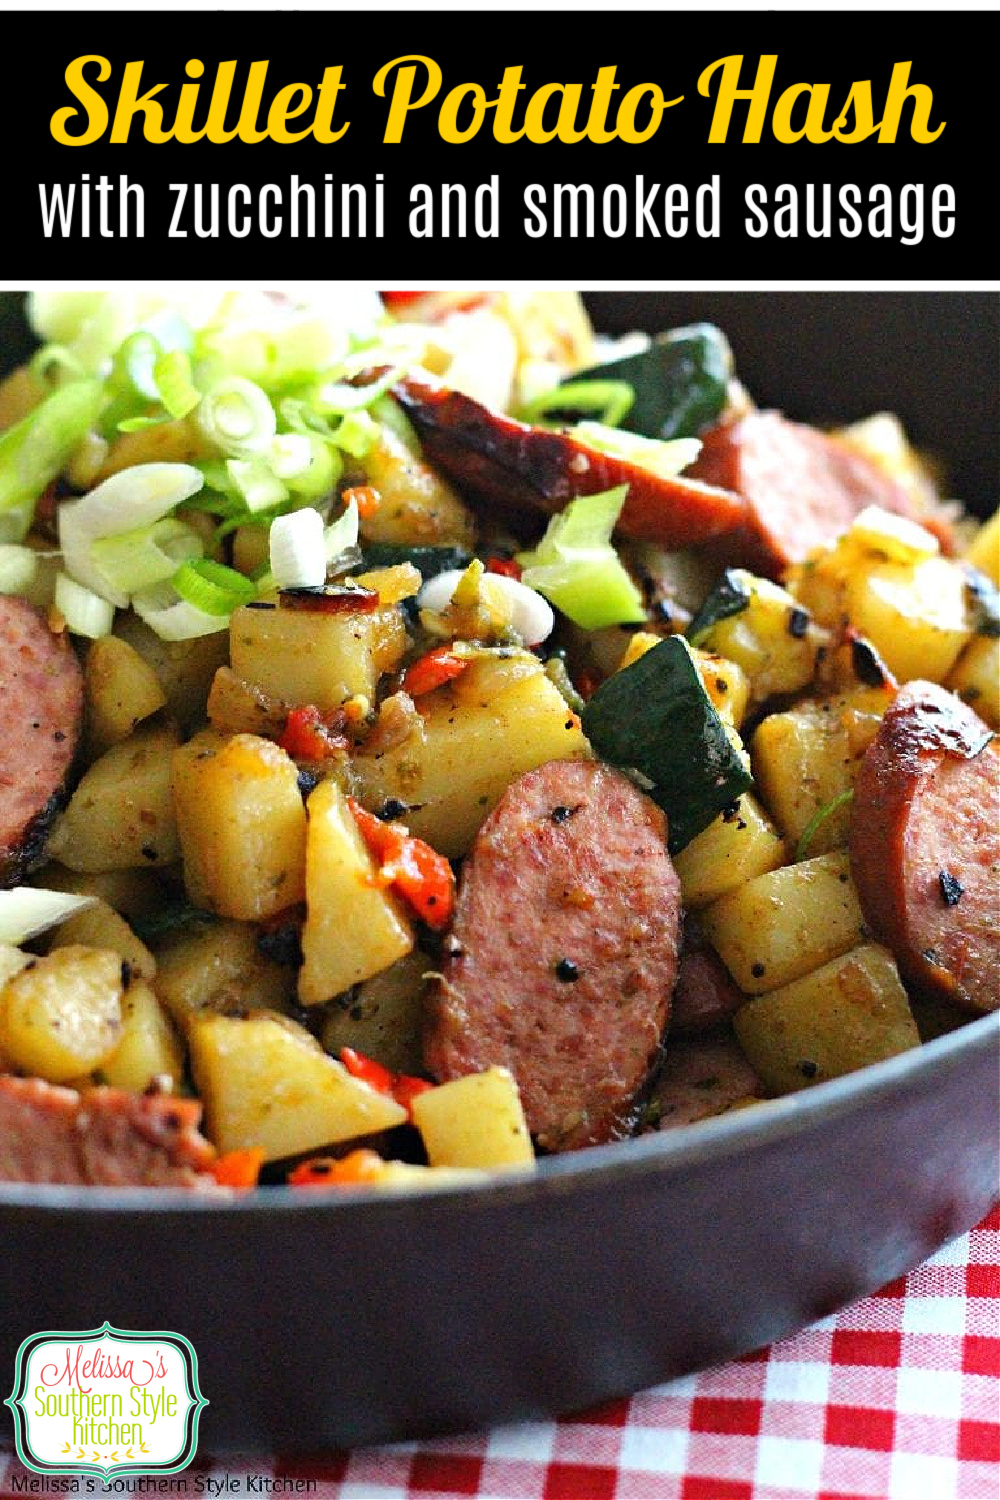 This skillet potato hash is filled with fresh zucchini and kielbasa making it a meal you can enjoy any time of day #potatohash #skilletmeals #zucchinirecipes #kielbasa #smokedsausage #food #dinnerideas #dinner #castironcooking #southernfood #southernrecipes #brunch #breakfast #potatoes